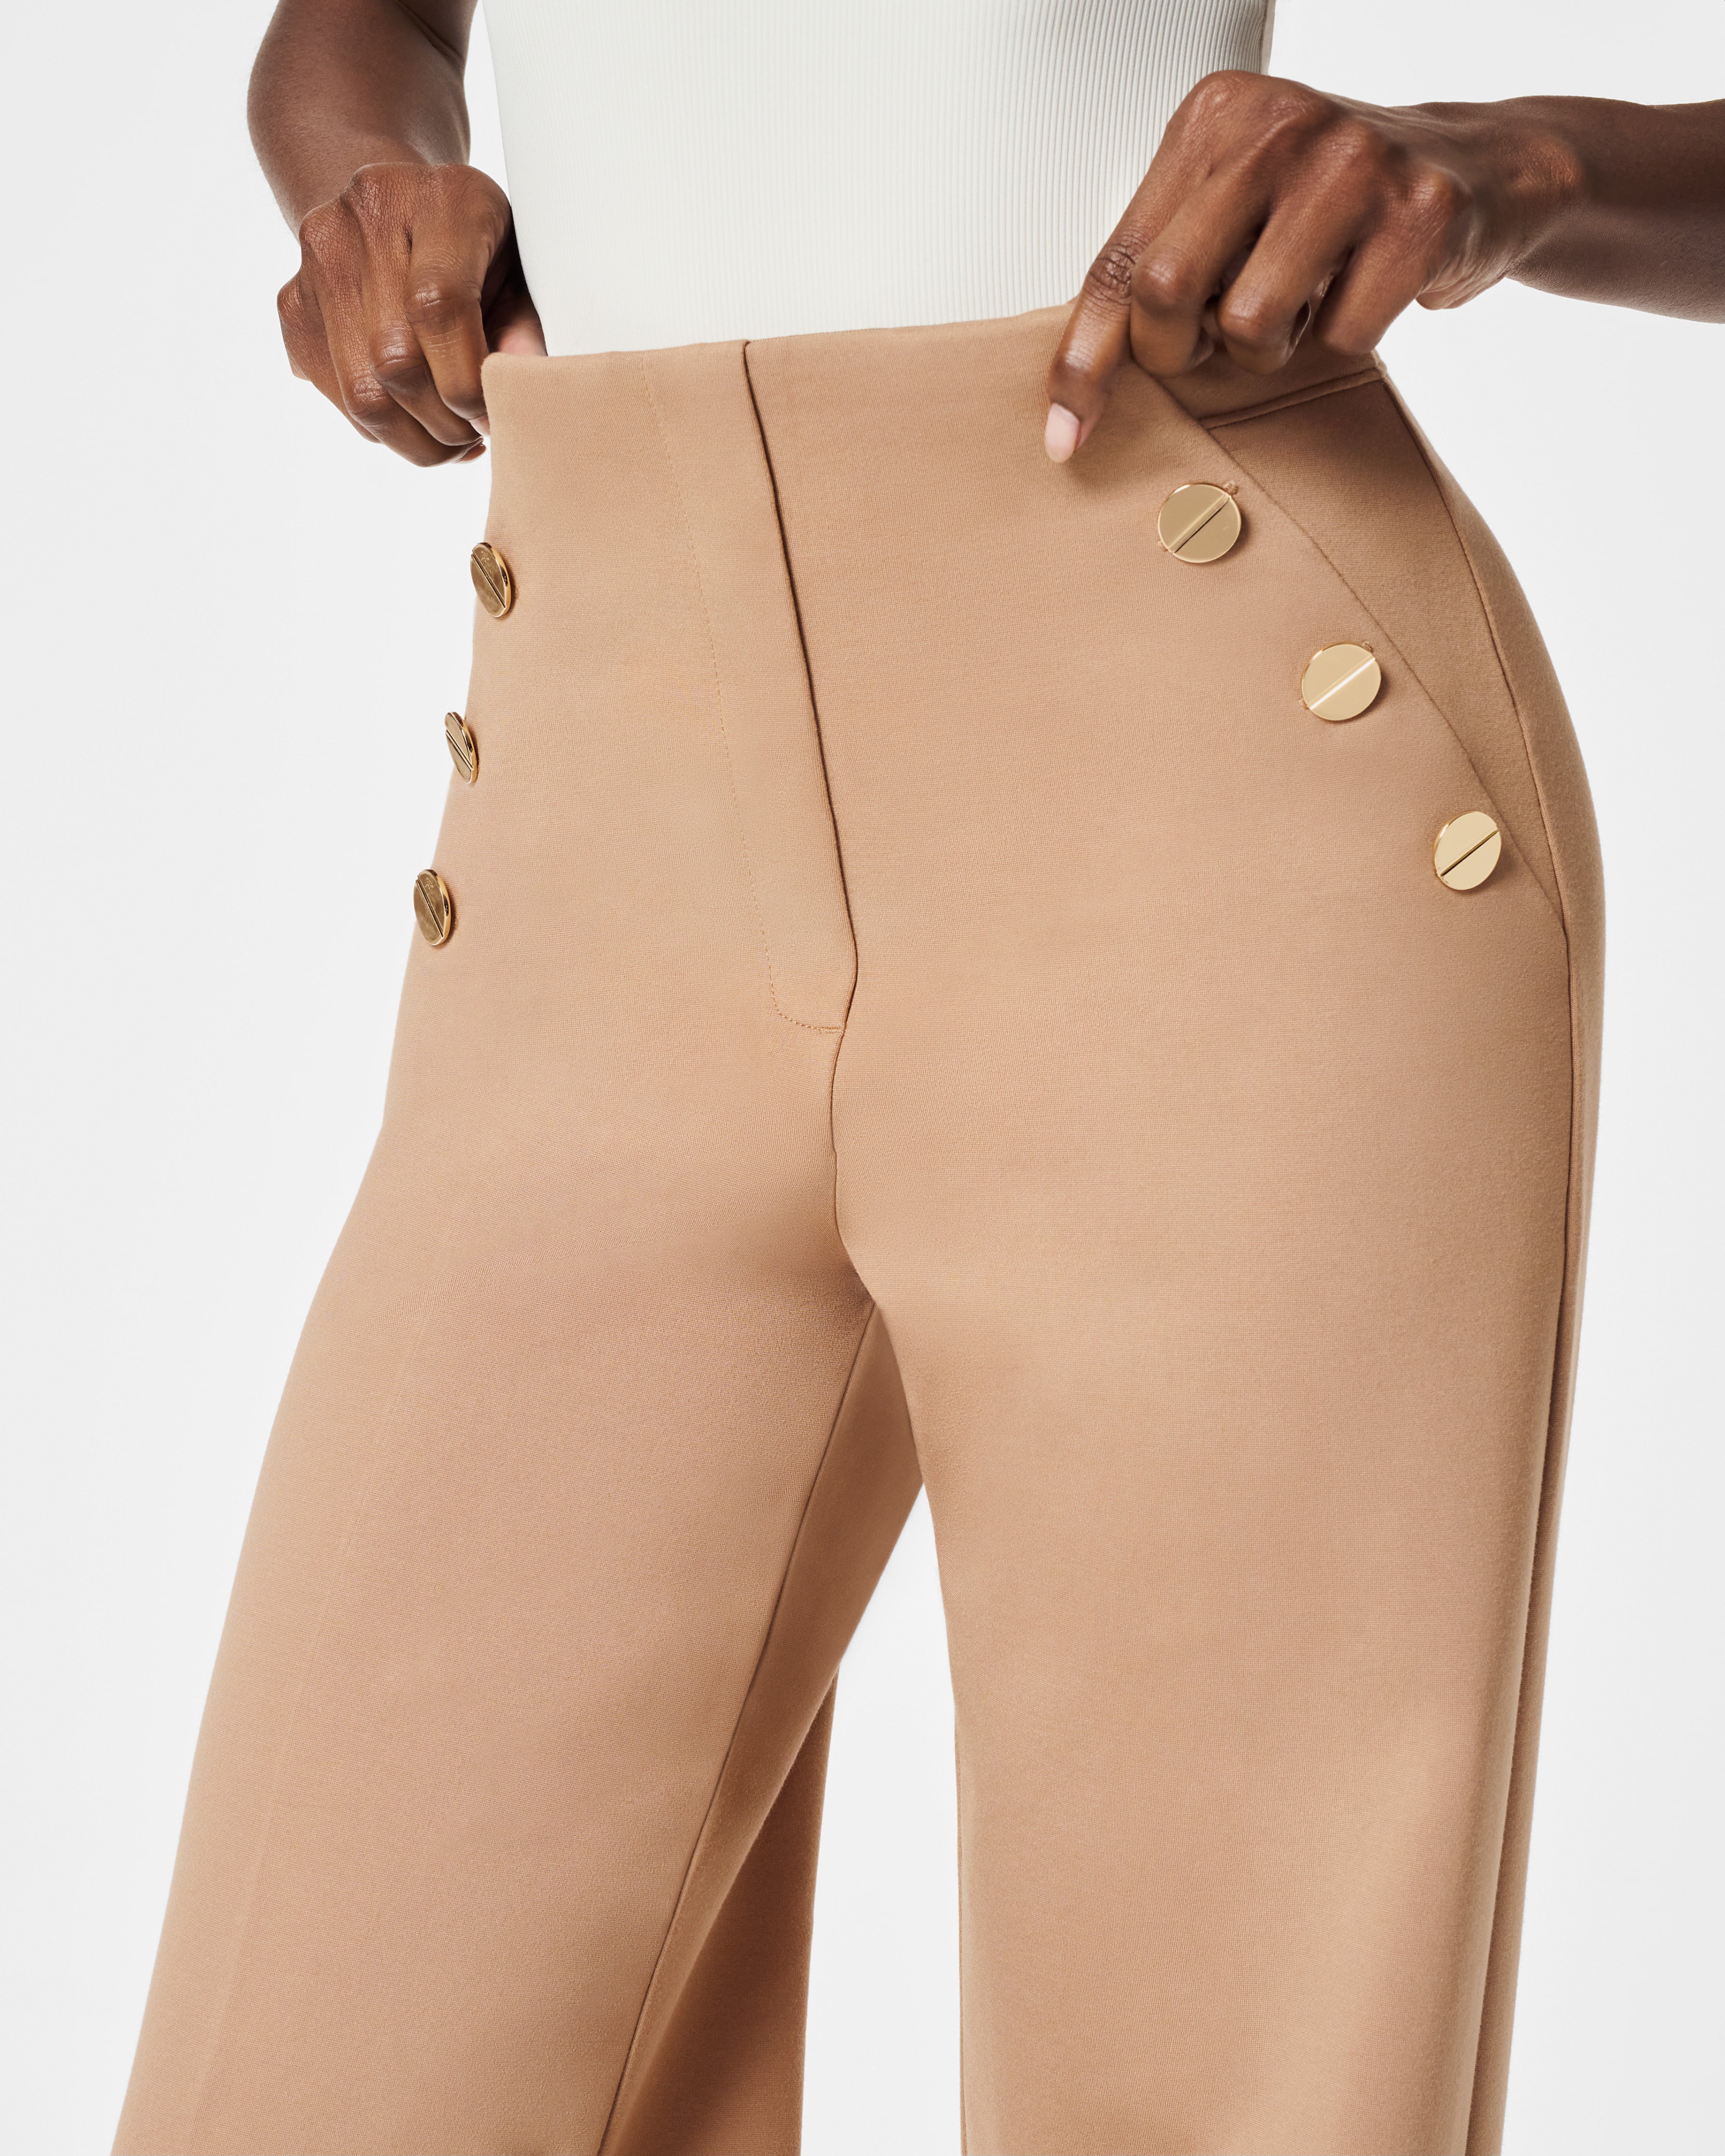 Pocket pants | Fitted Waist + Buttons